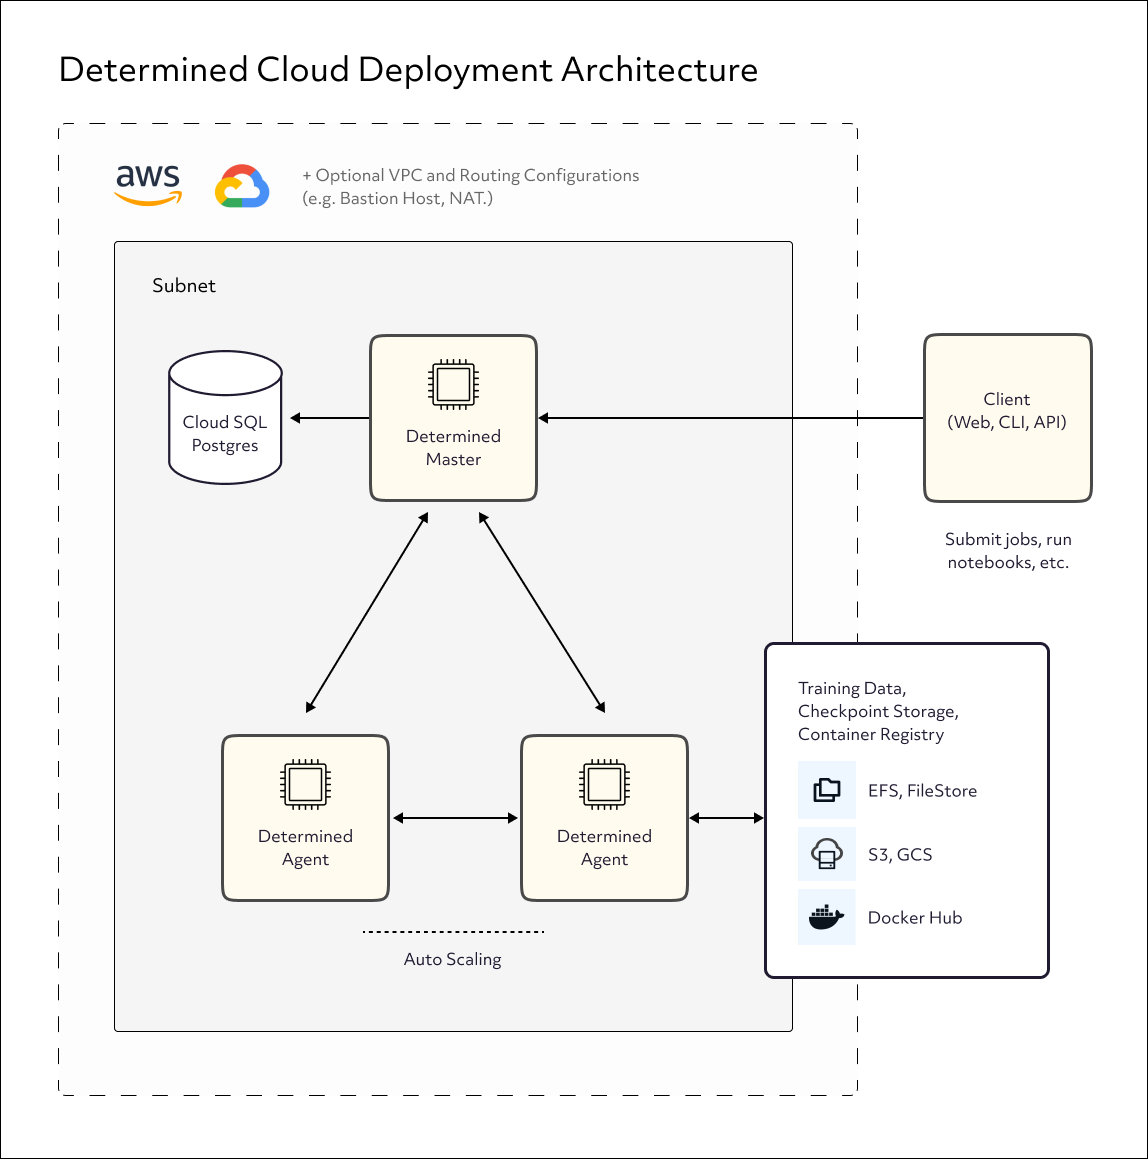 Diagram showing Determined Cloud Deployment Architecture on AWS